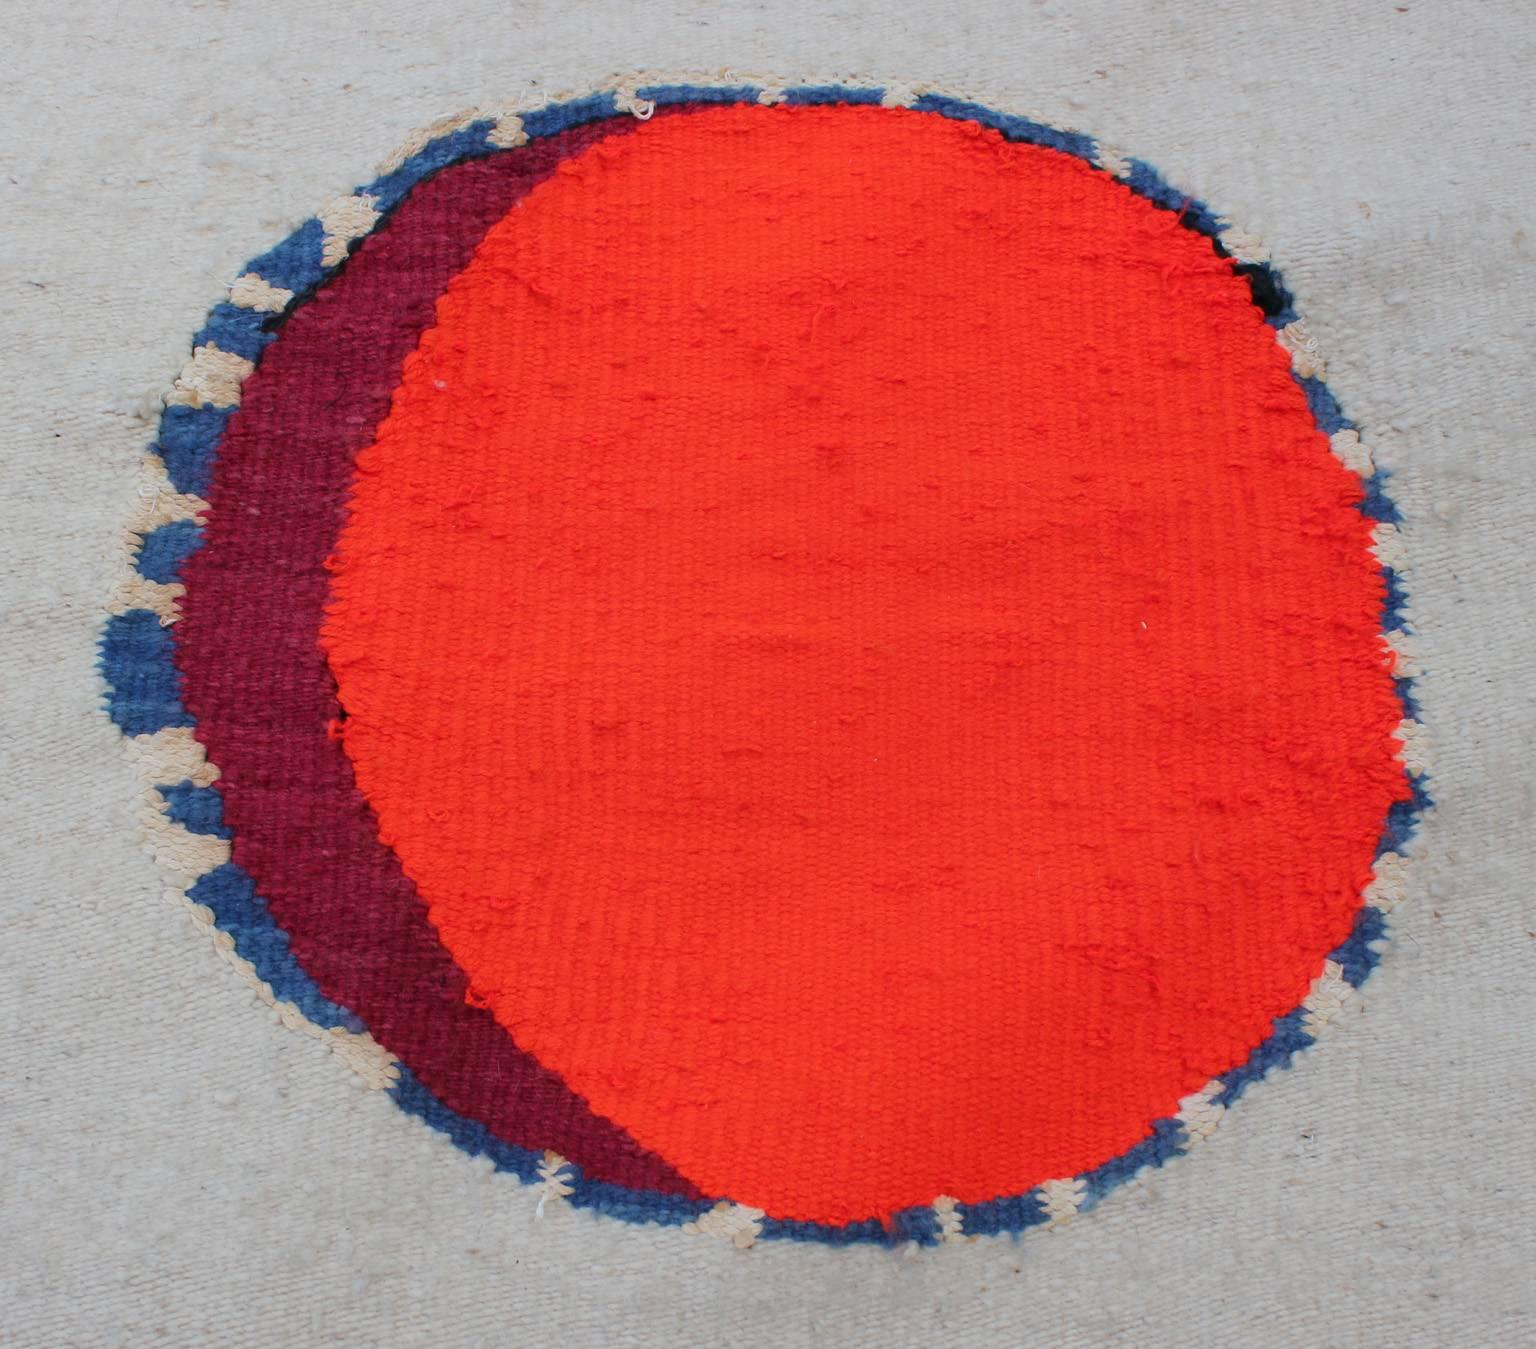 Stunning, abstract wool tapestry by Saul Borisov. Tapestry features vivid orange, brick red and blue. Perfect piece of art for a Mid-Century, Scandinavian, or modern style interior.